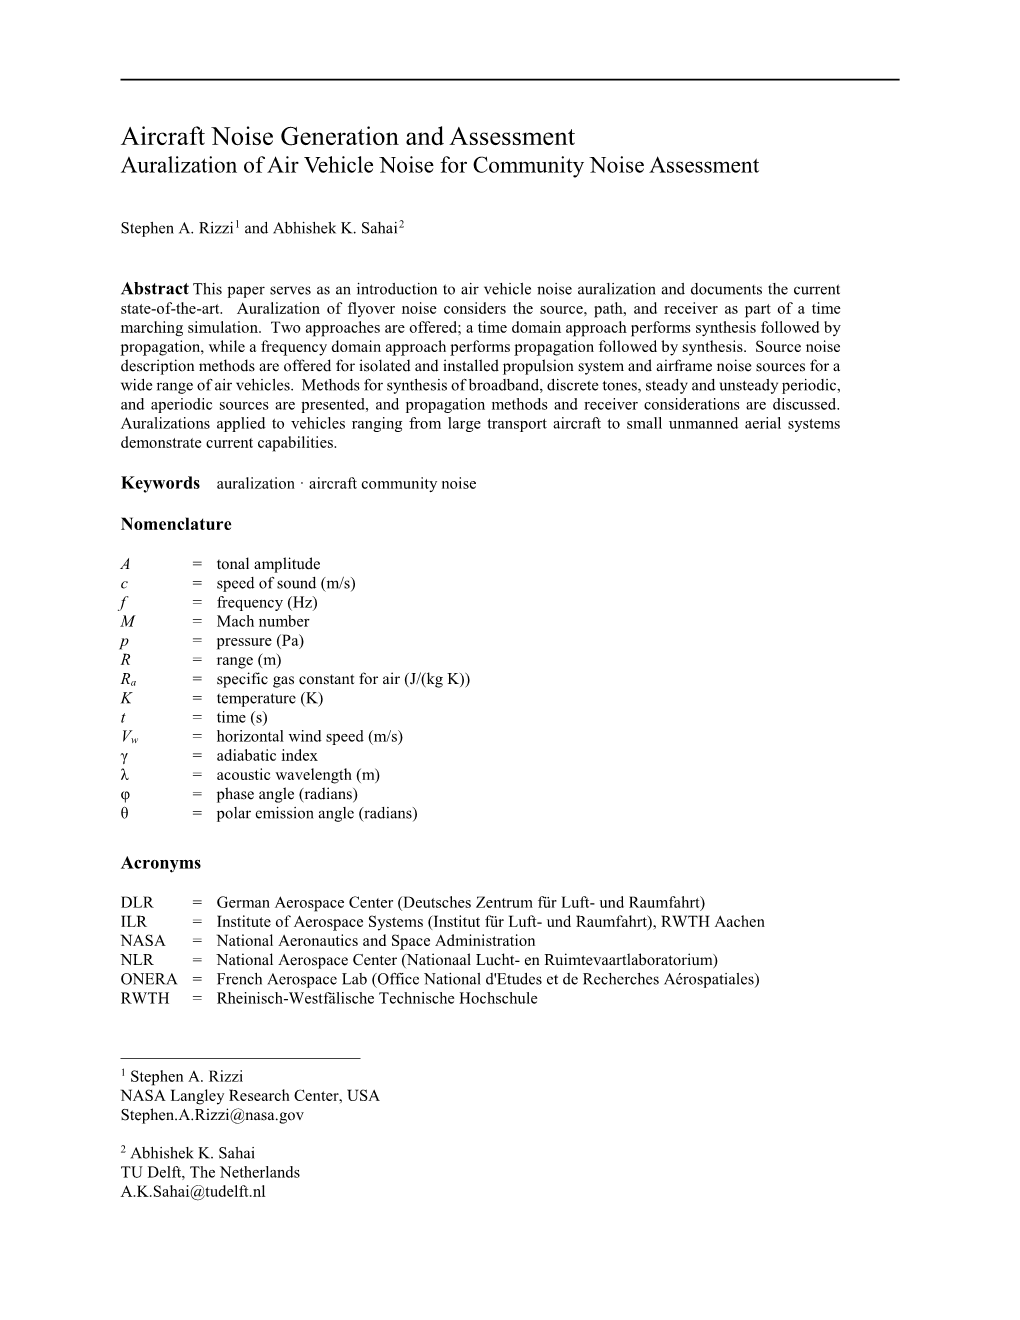 Auralization of Air Vehicle Noise for Community Noise Assessment